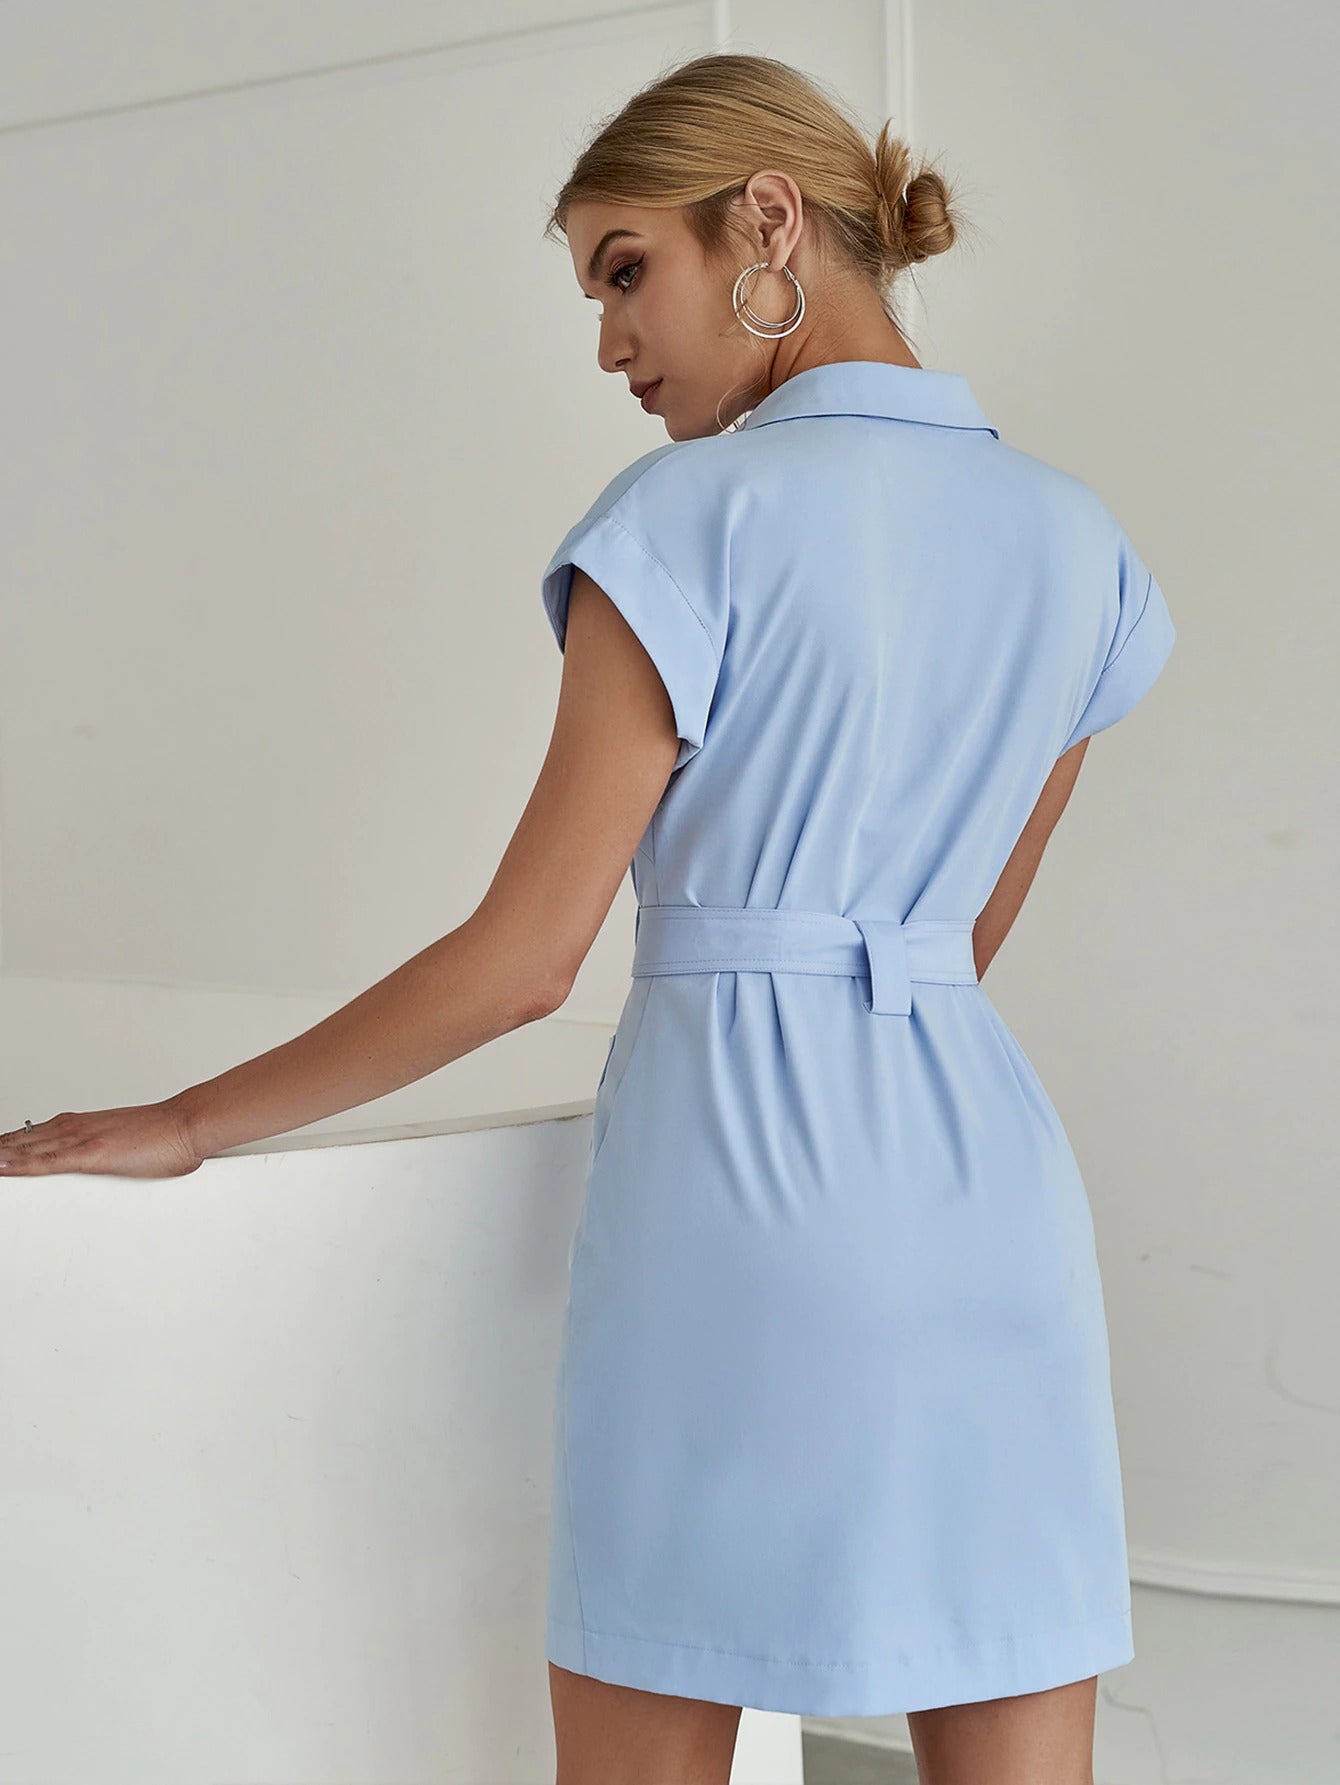 Coco Looking Up Light Blue Belted Mini Shirt Dress Coco dress